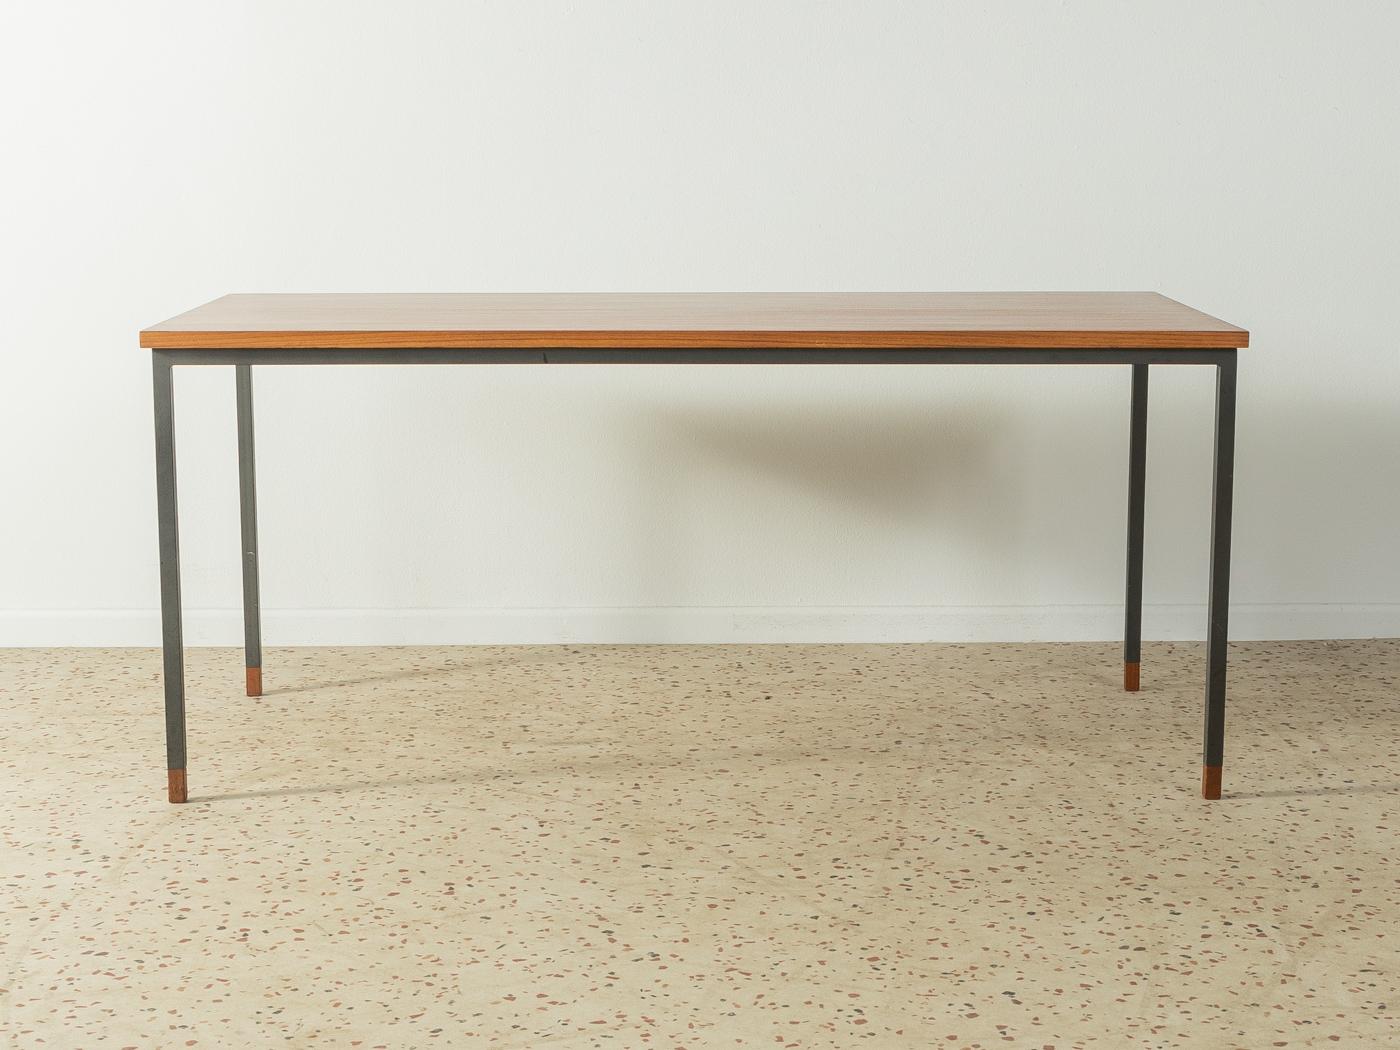 Classic teak coffee table from the 1960s. Squared steel frame with wooden feet and teak veneered table top.

Quality features:
 Very good workmanship
 High quality materials
 Made in Germany. Designer: Wilhelm Renz, frame manufacturer :